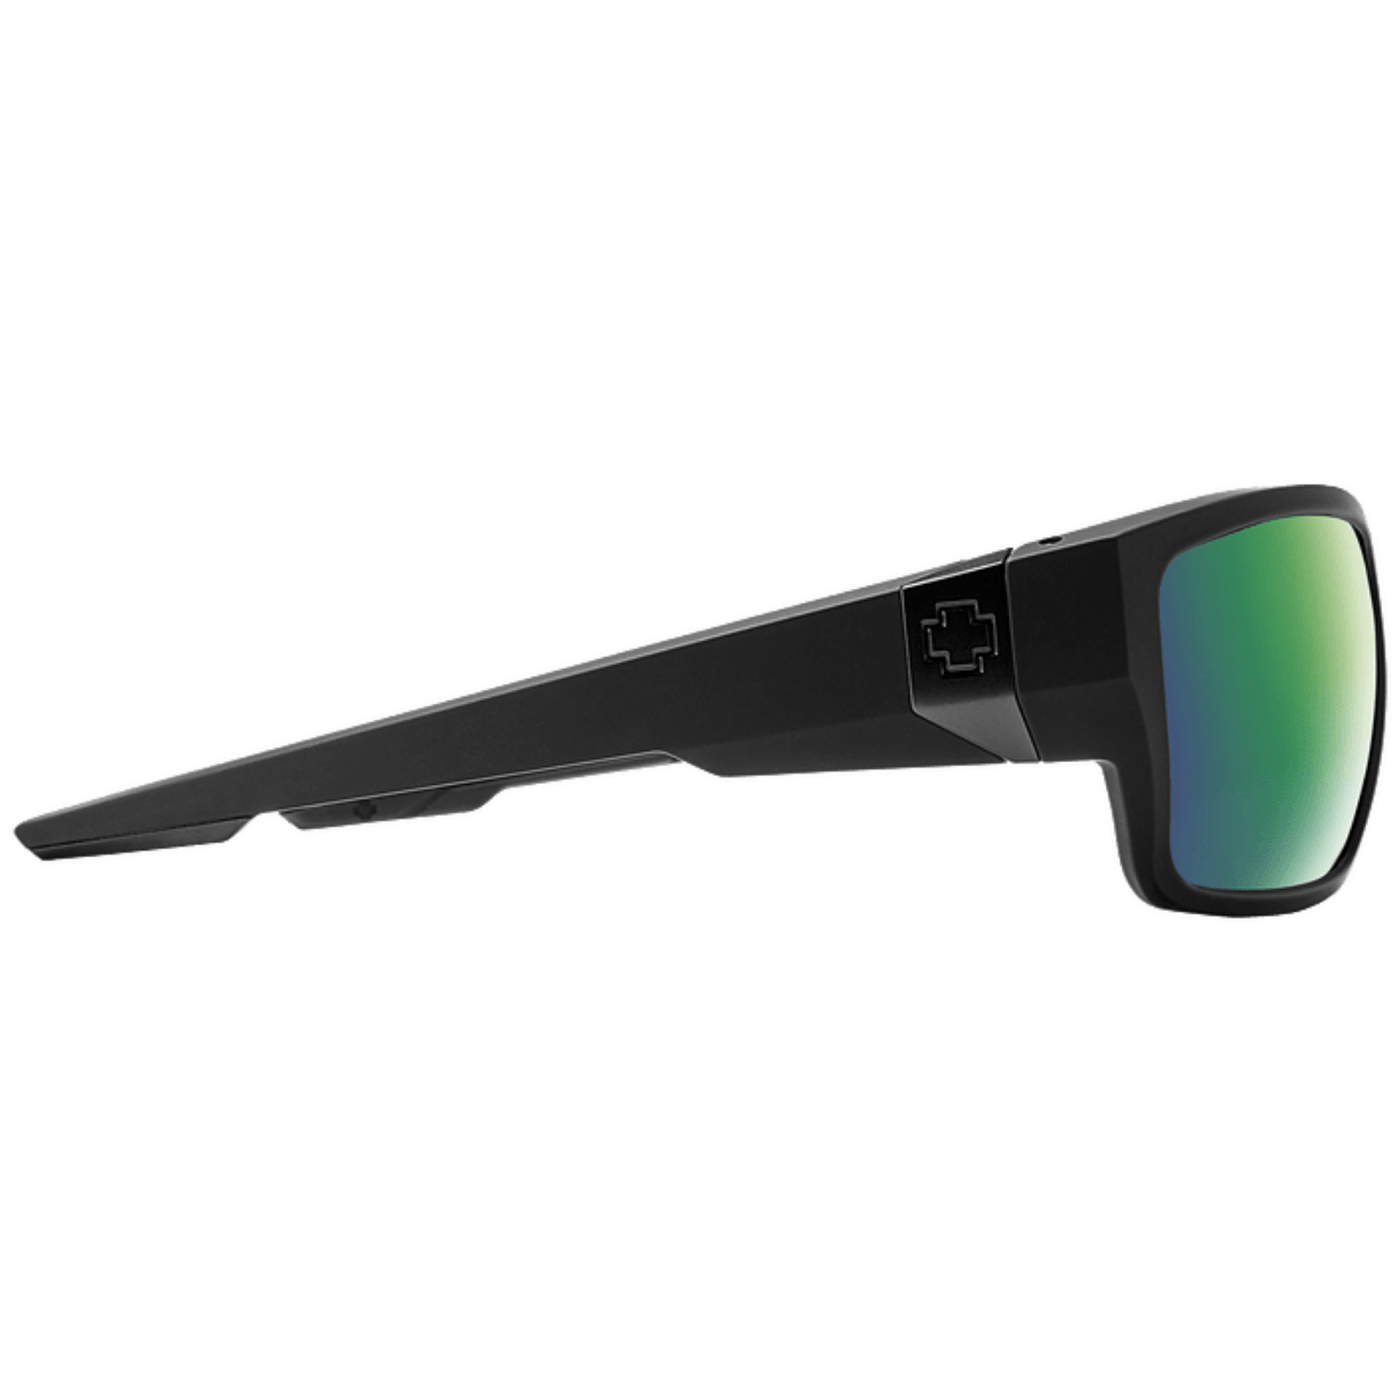 SPY DIRTY MO TECH Sunglasses - Green 8Lines Shop - Fast Shipping